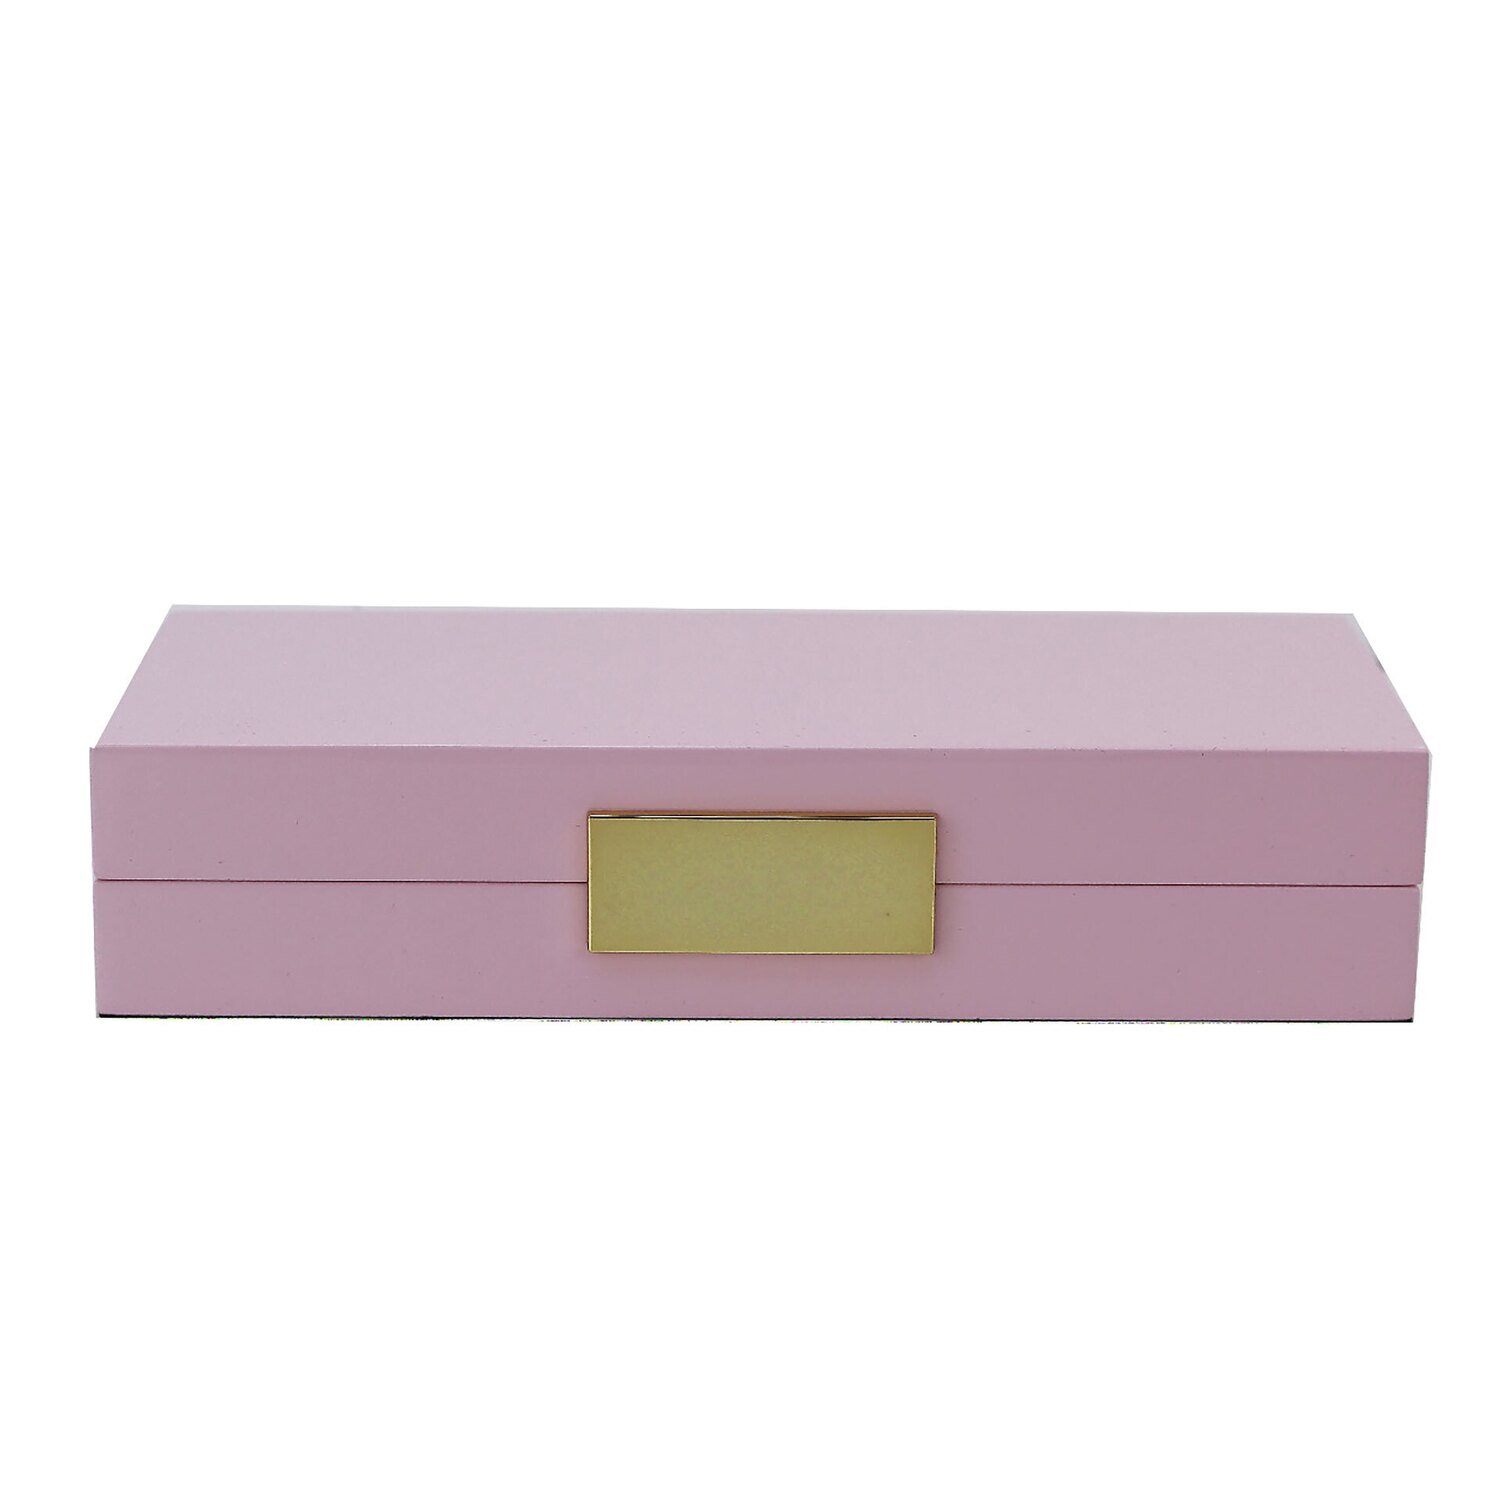 Addison Ross Pink Lacquer Box With Silver 4 x 9 Inch Lacquer BX1250